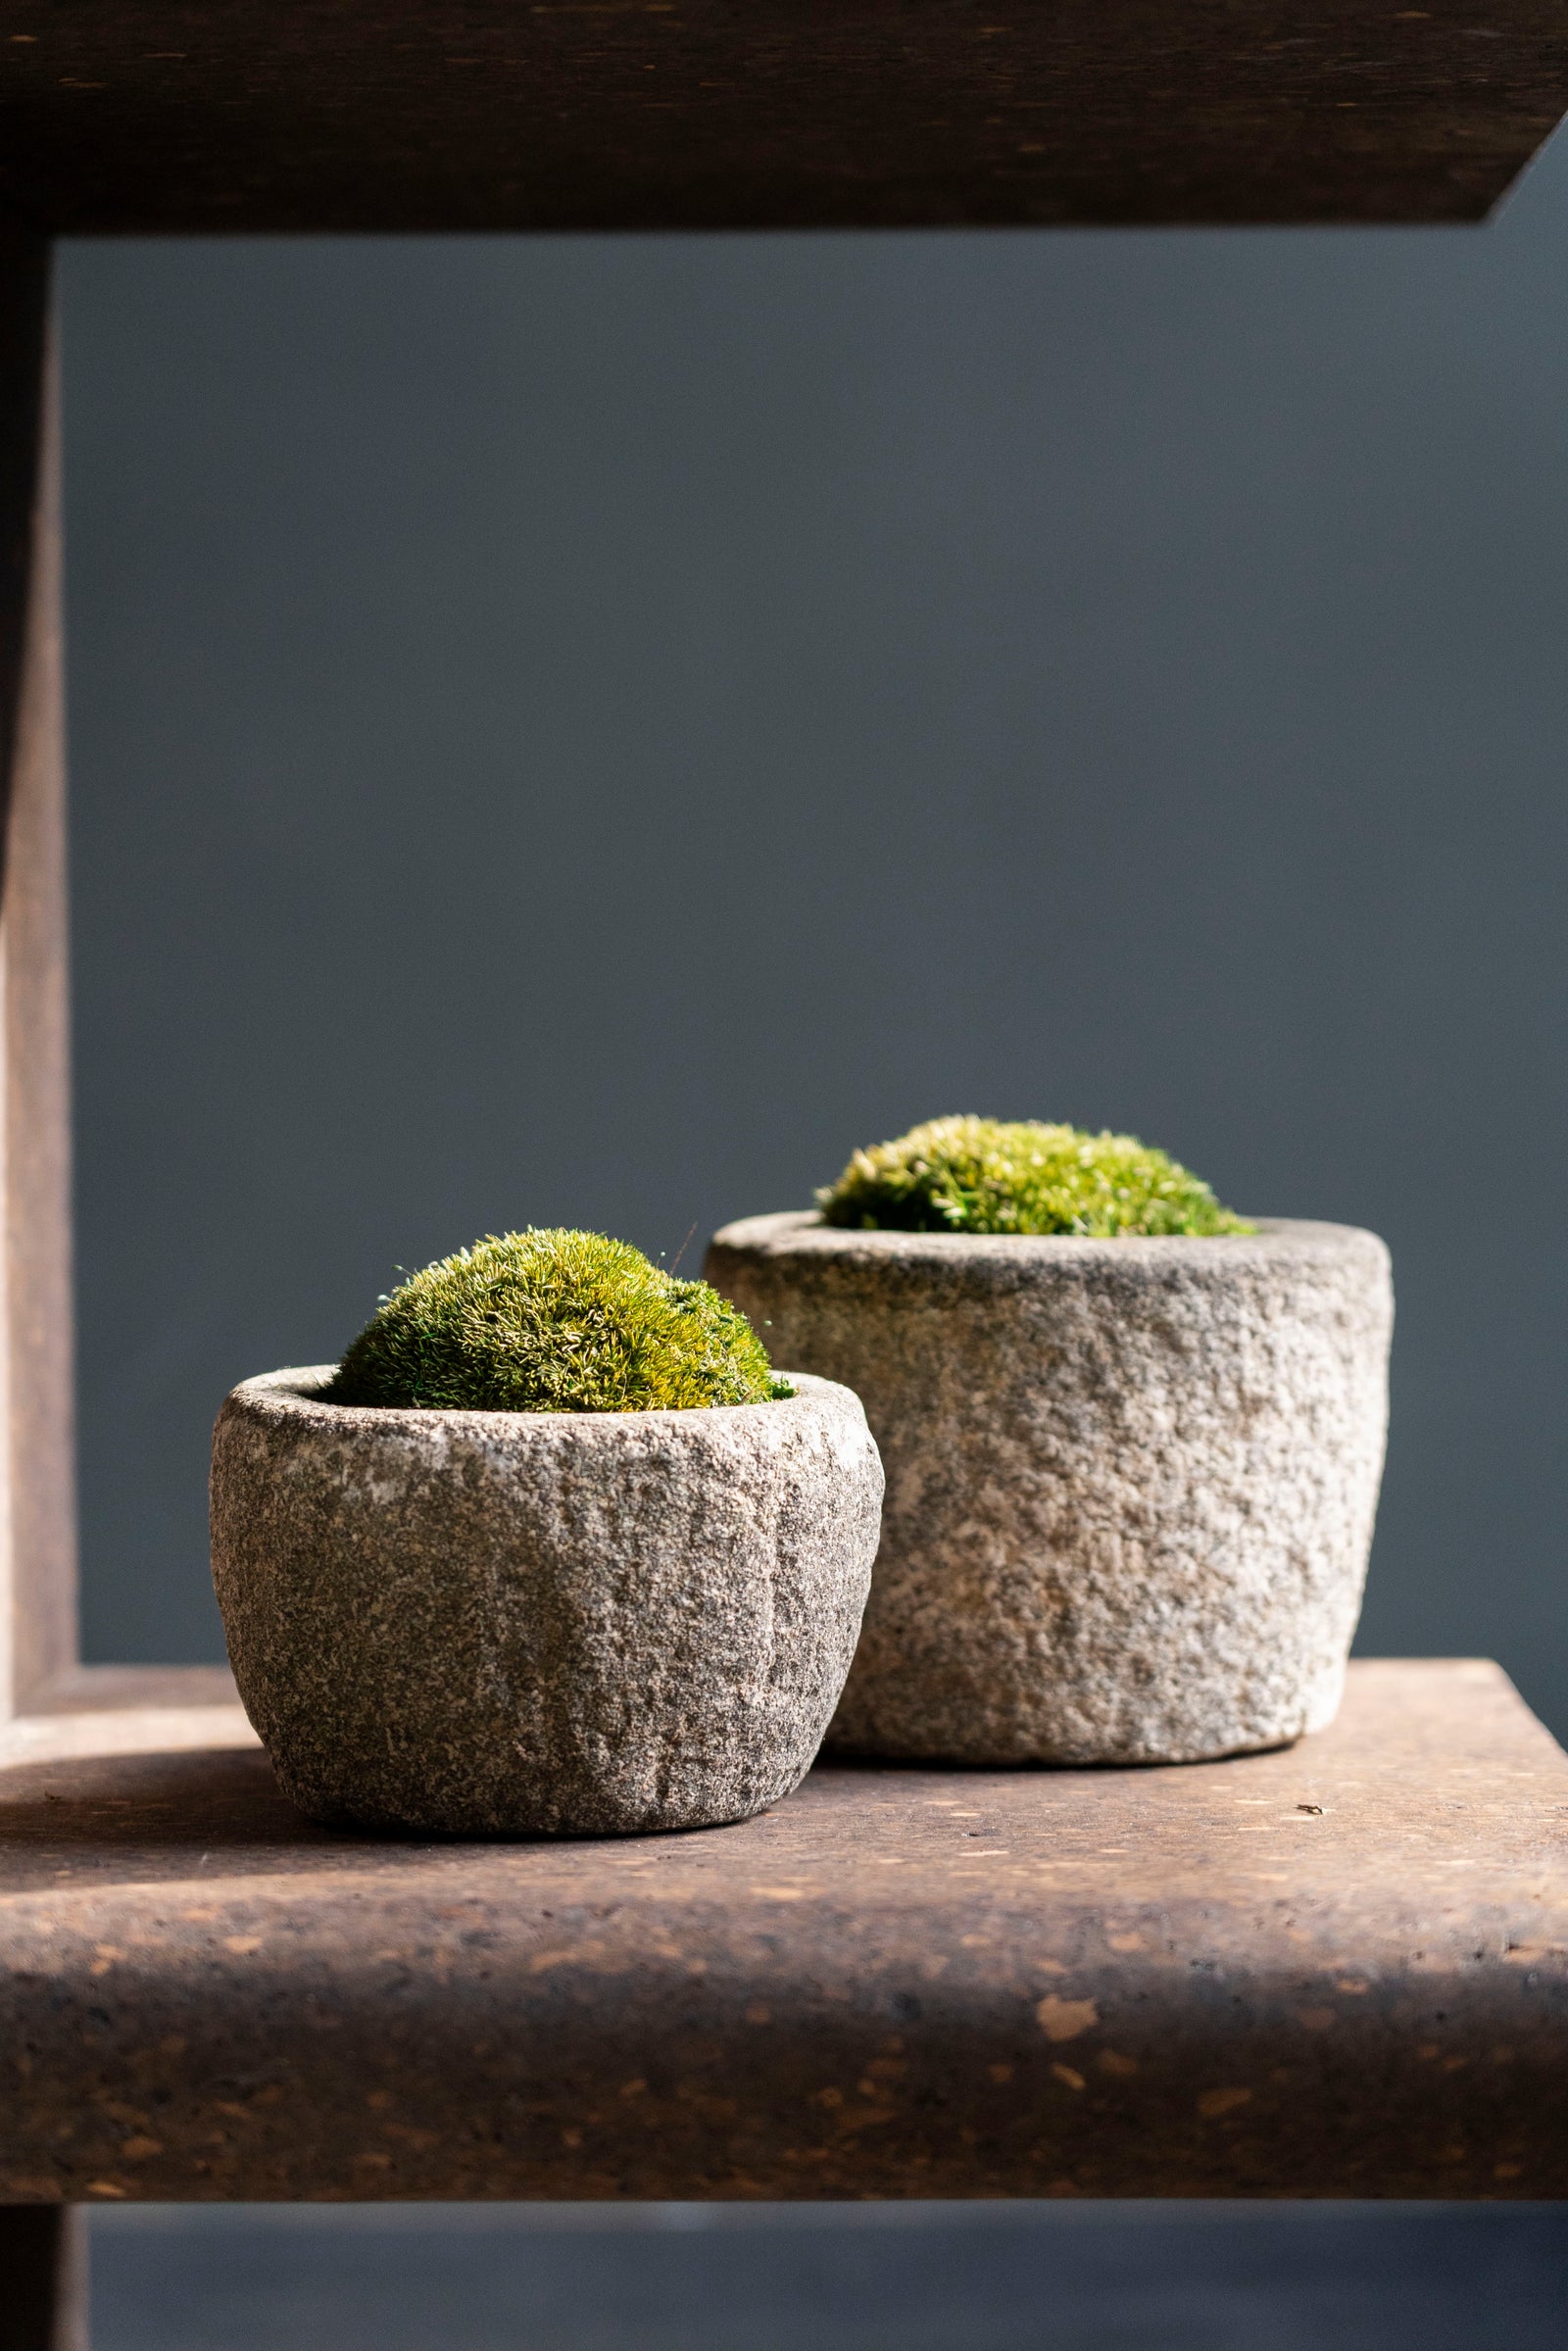 Antique Stone Mortar with Moss